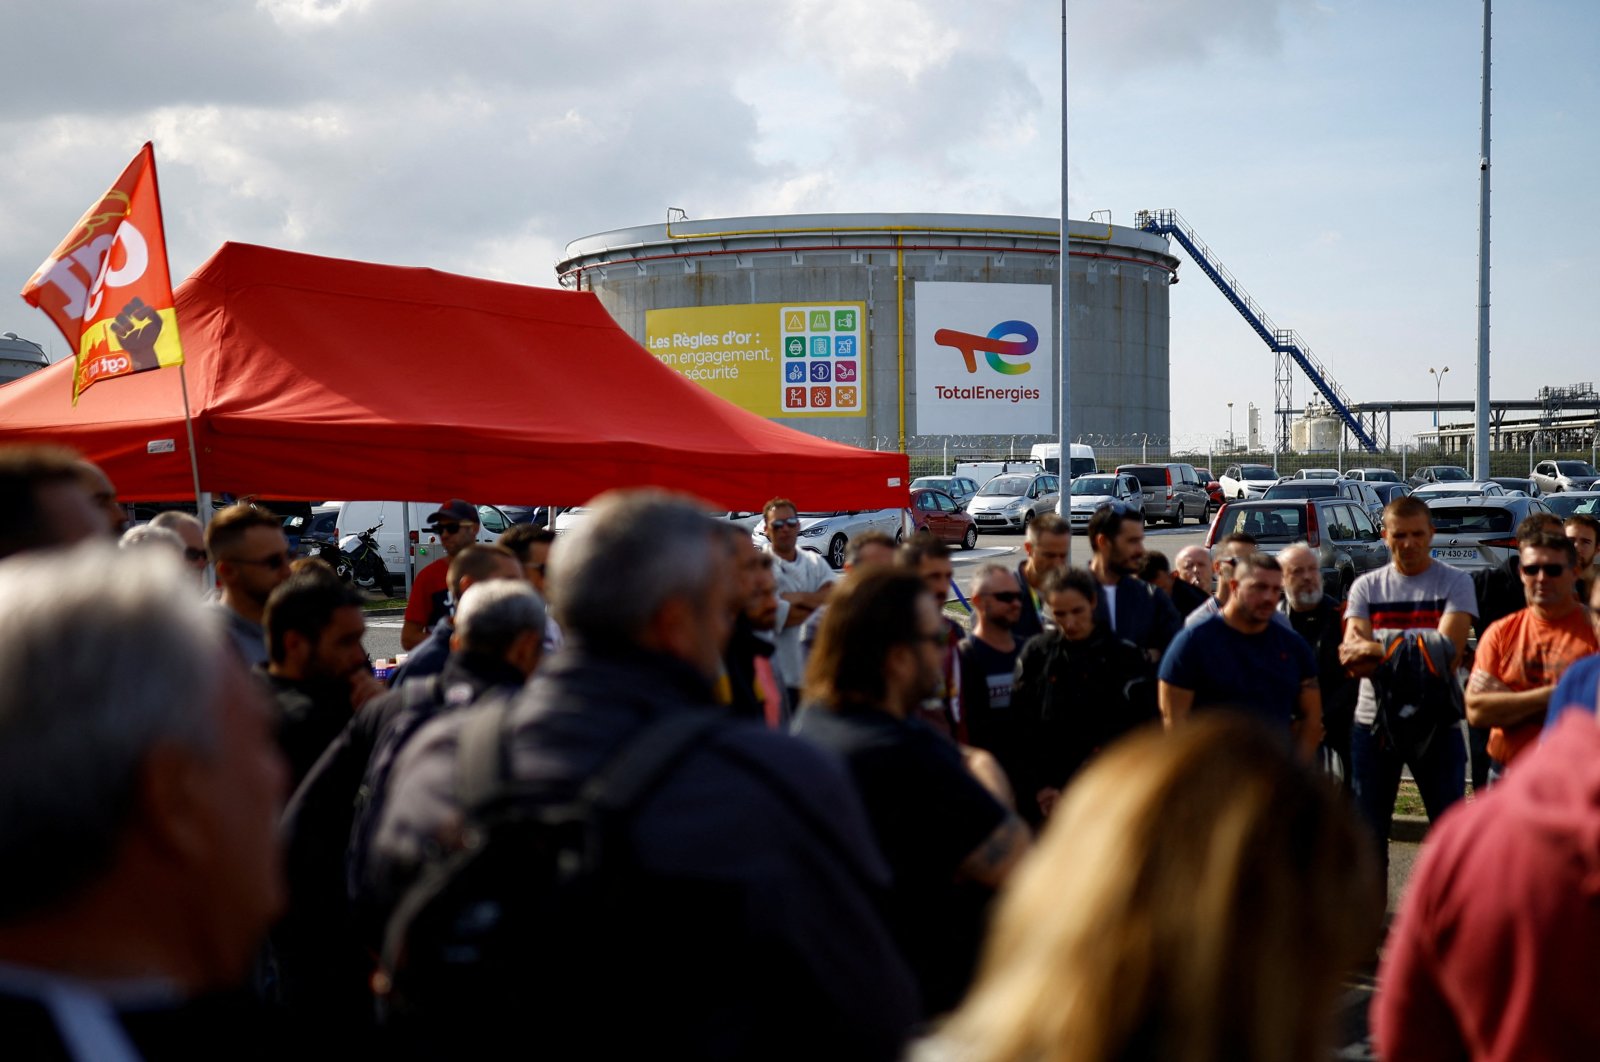 Workers on strike gather in front of the French oil giant TotalEnergies refinery in Donges near St. Nazaire, France Oct. 12, 2022. (Reuters Photo)